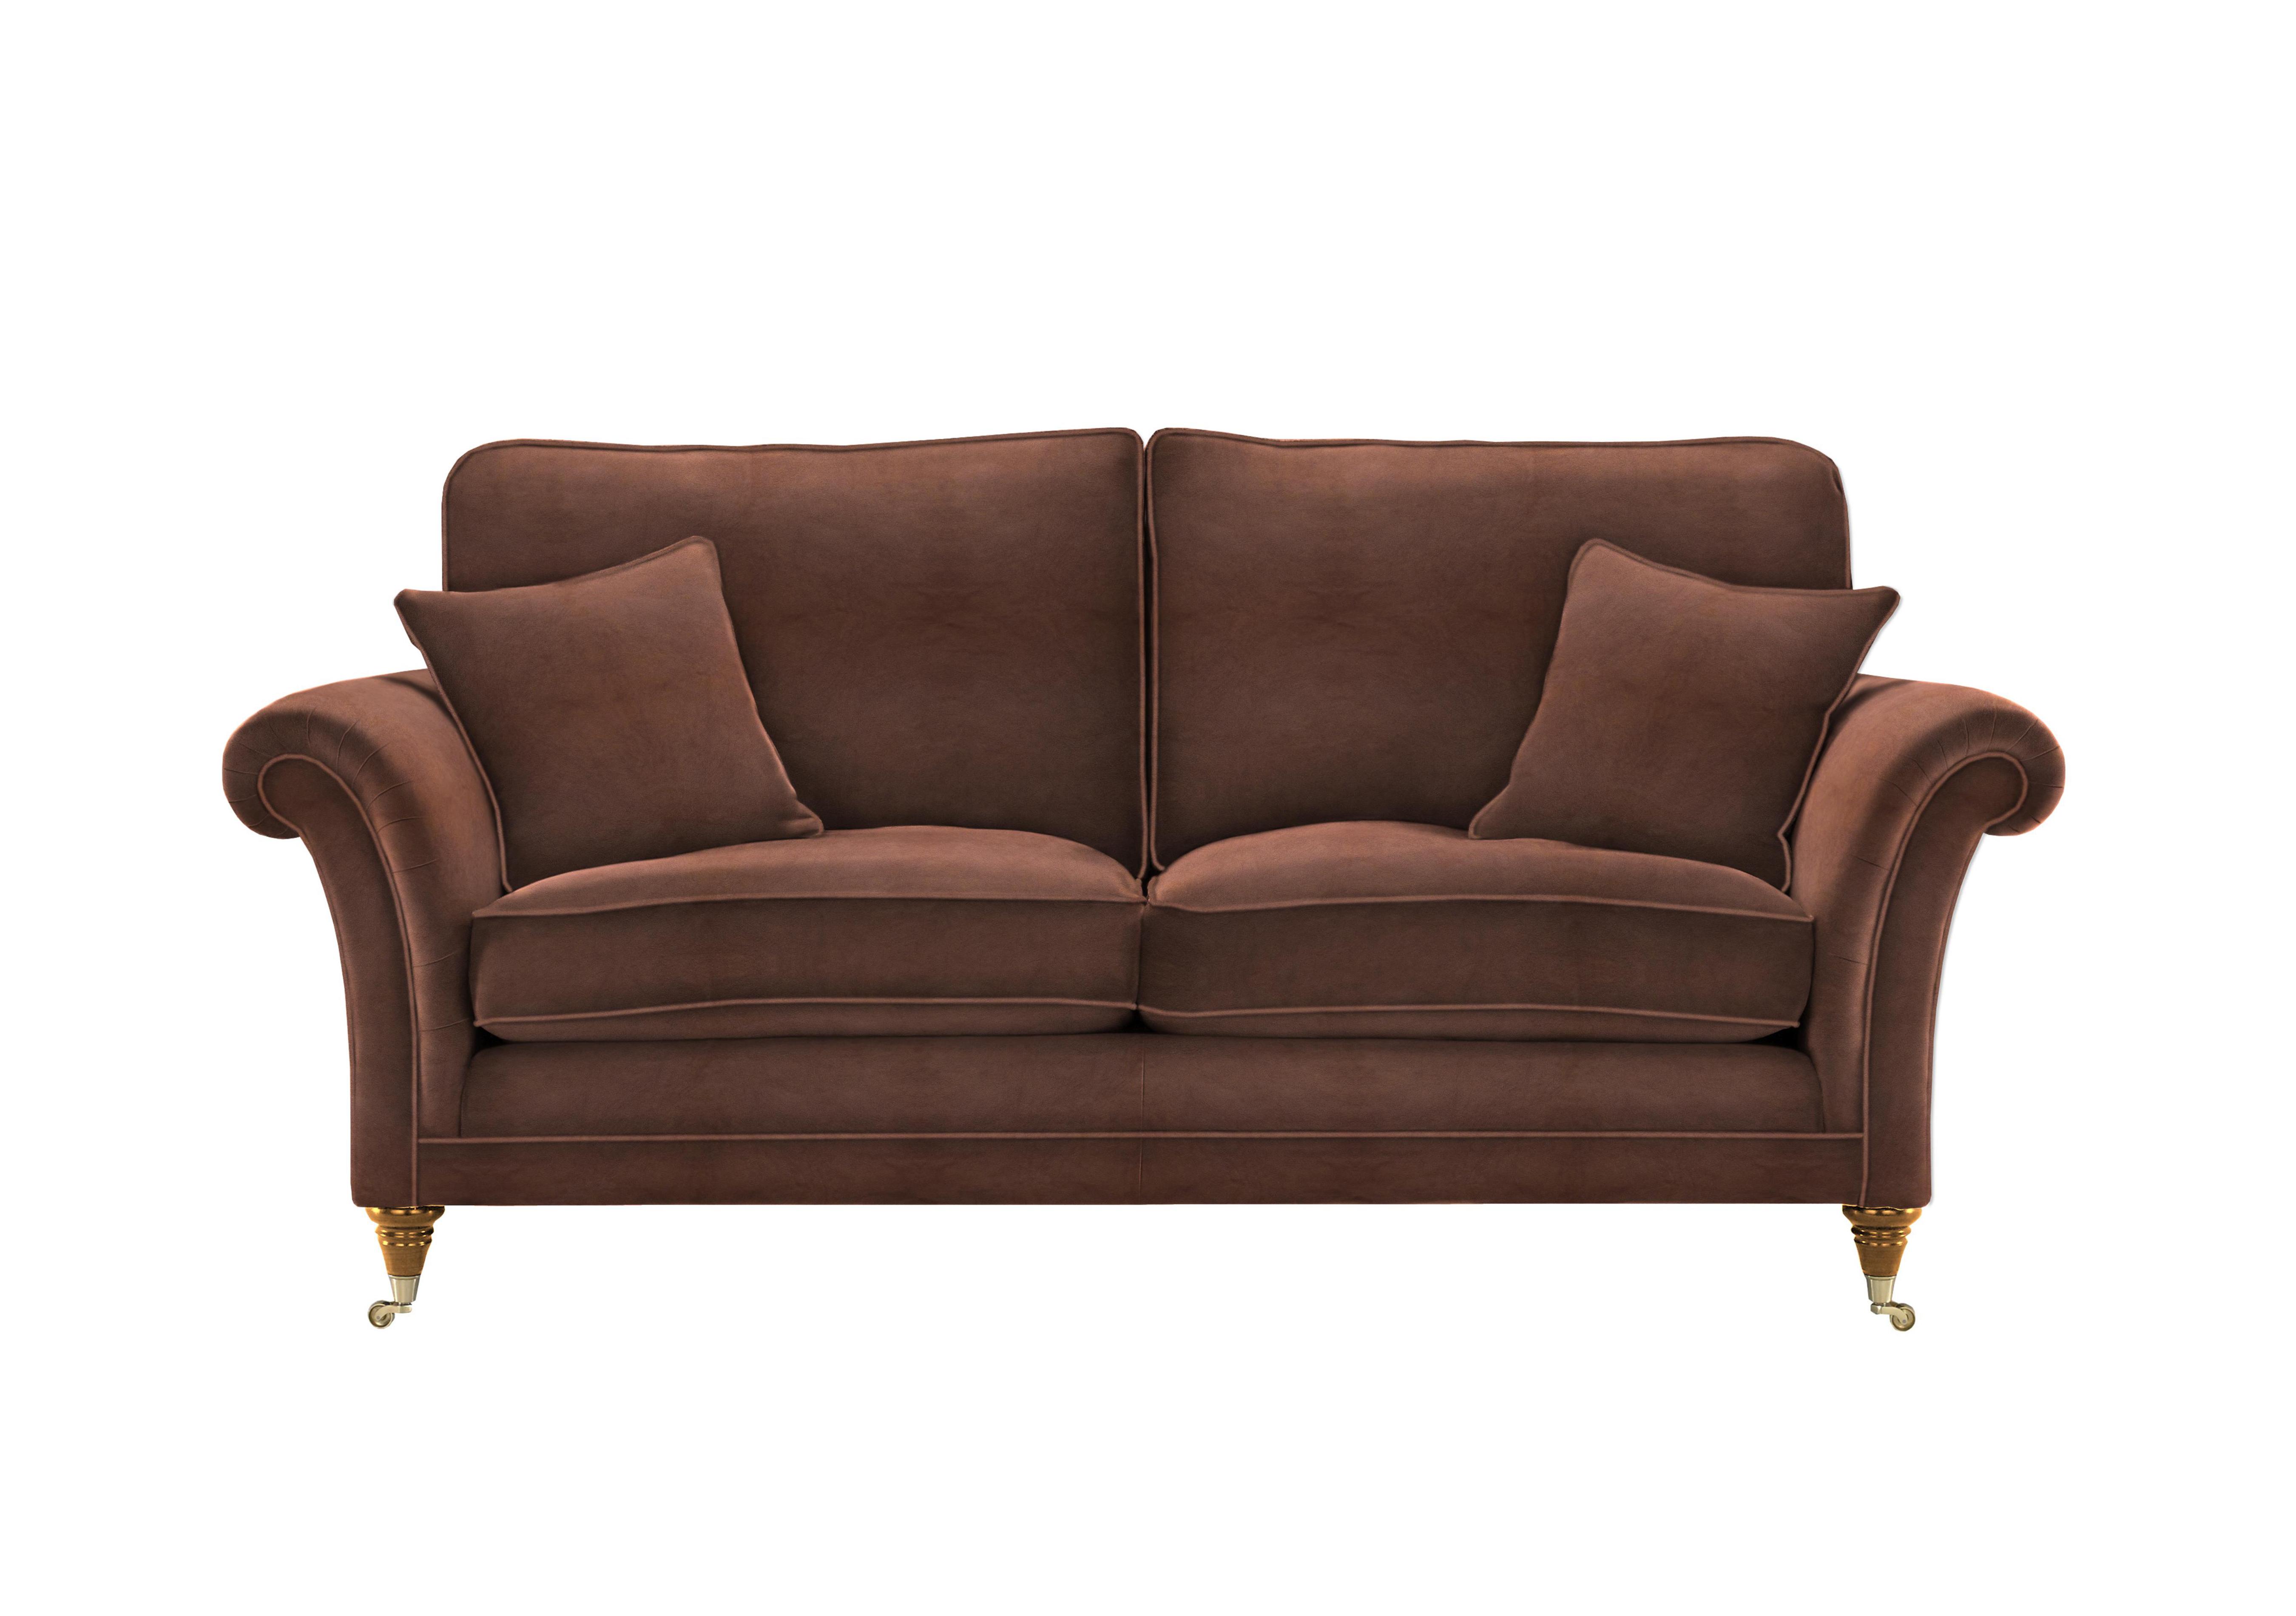 Burghley Large 2 Seater Leather Sofa in London Saddle 001033-0021 on Furniture Village